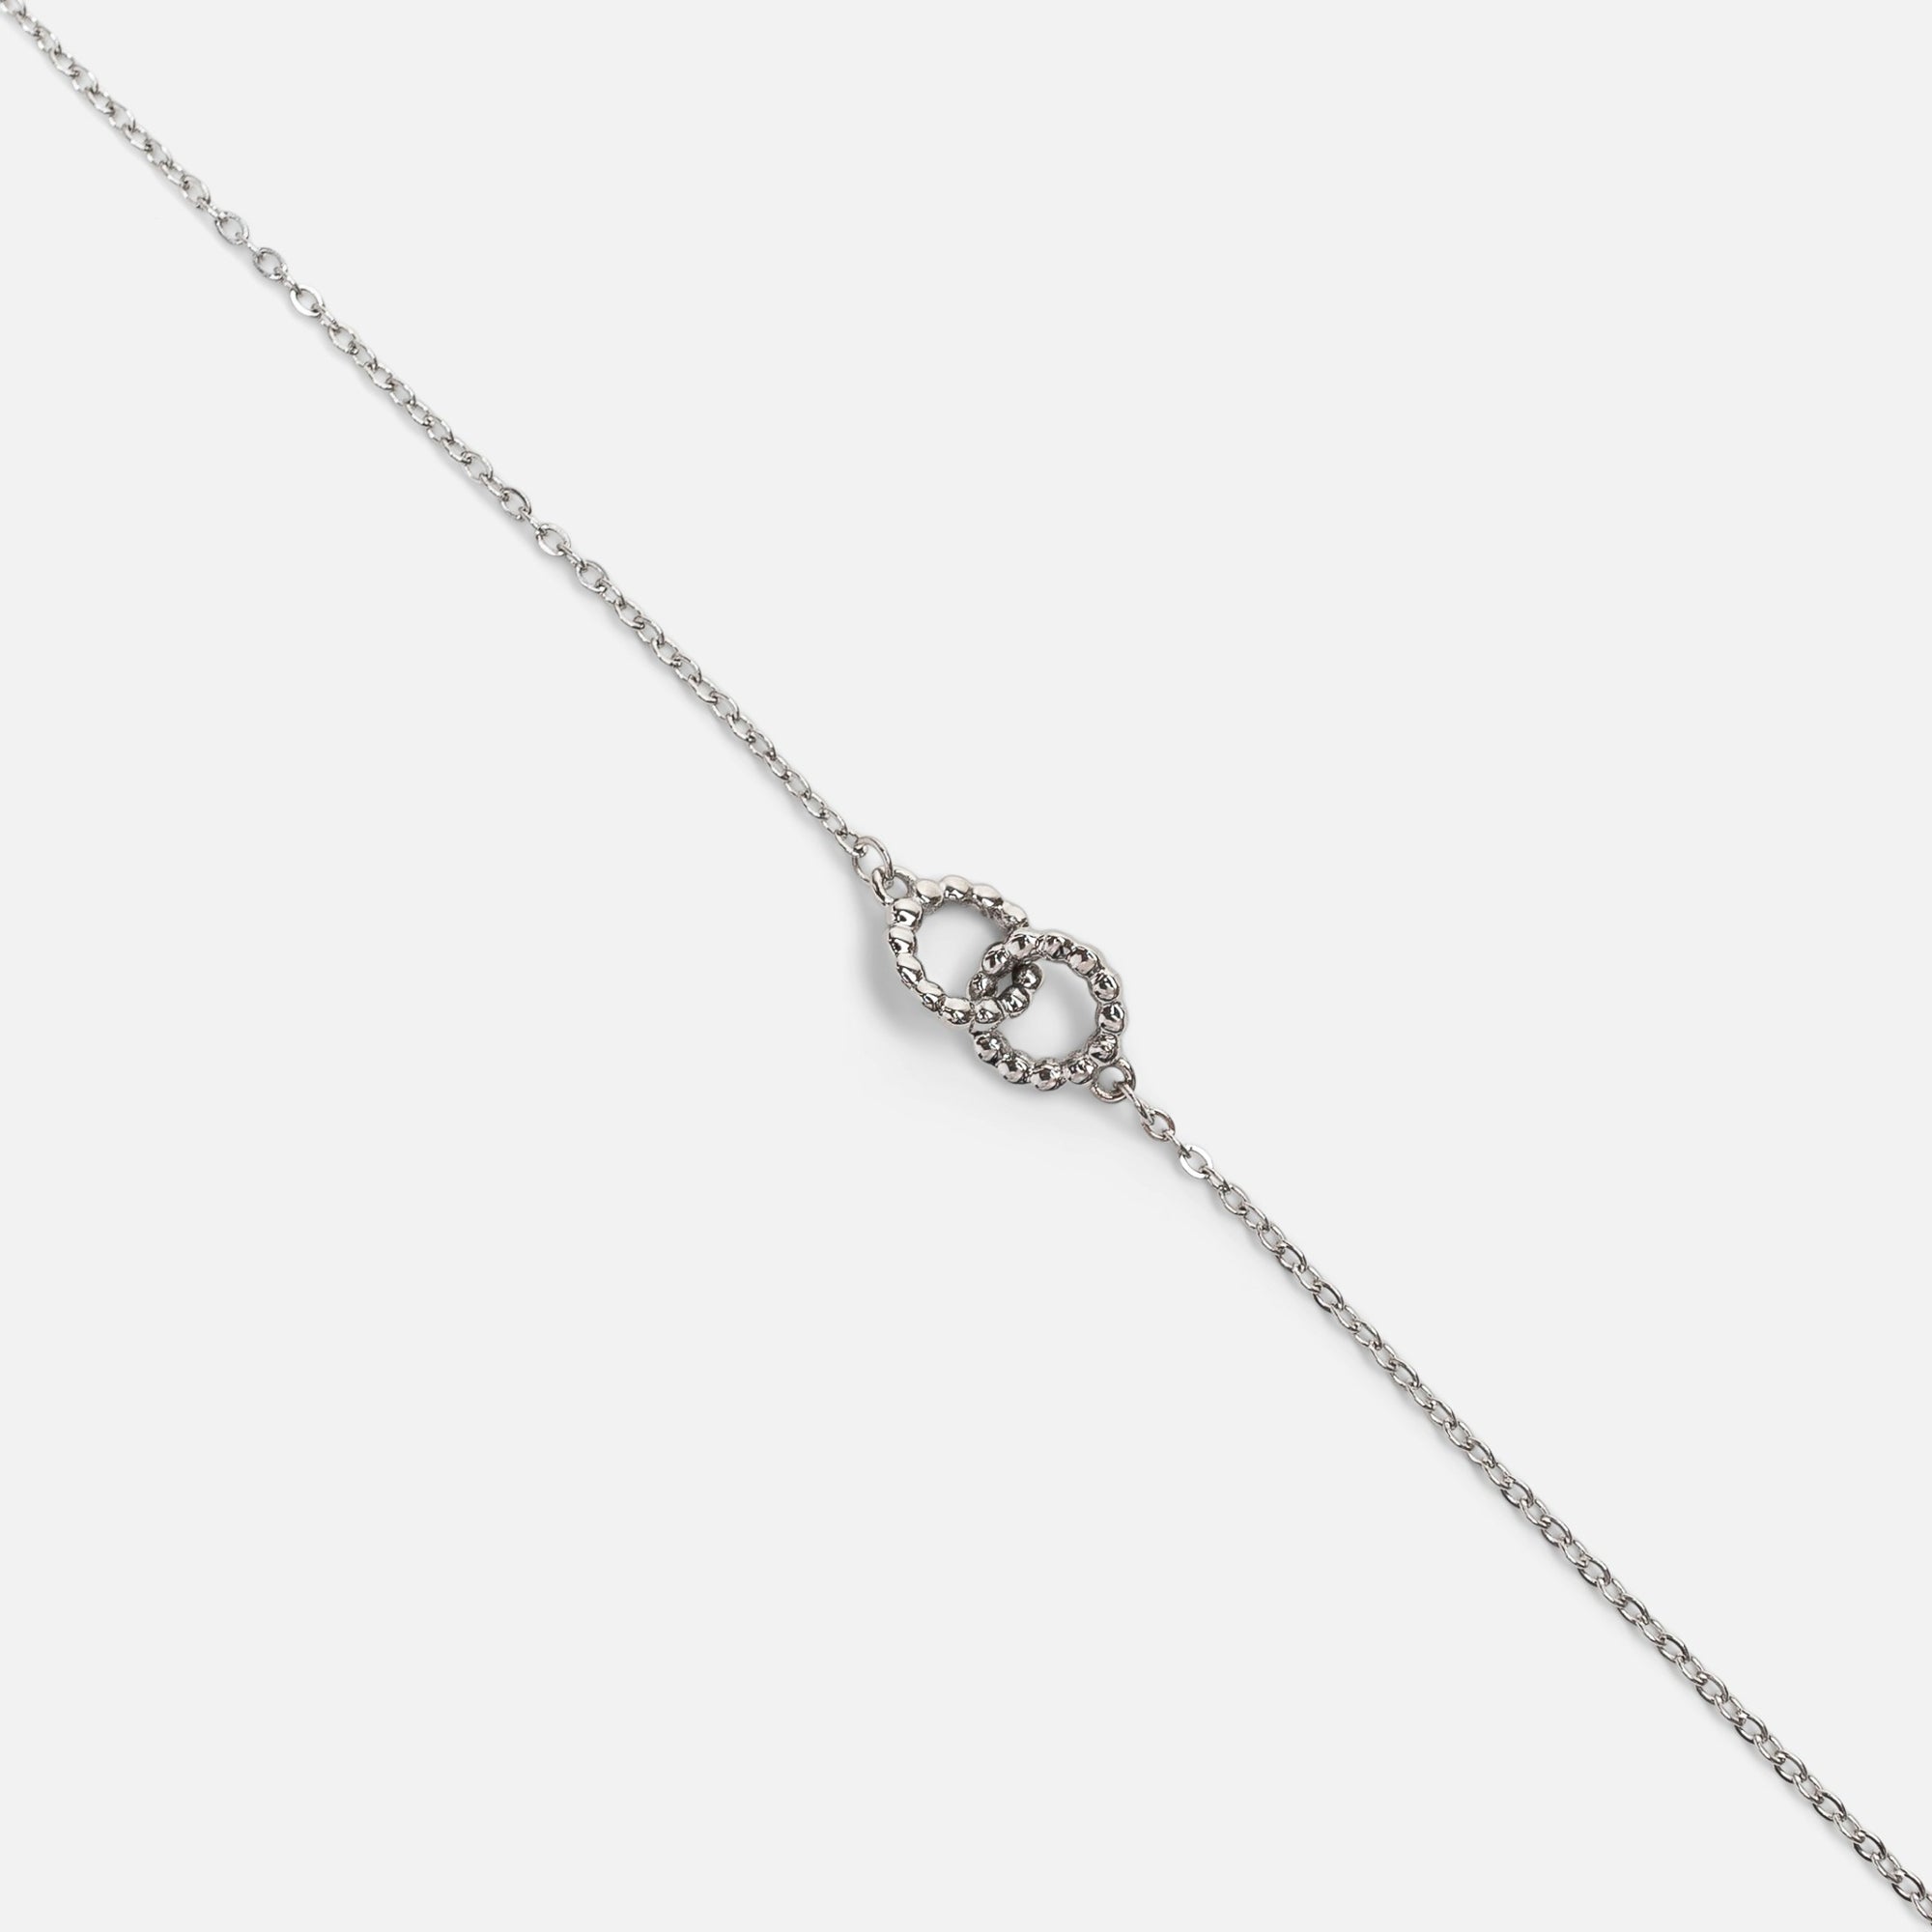 Silver bracelet with two intertwined circles in stainless steel